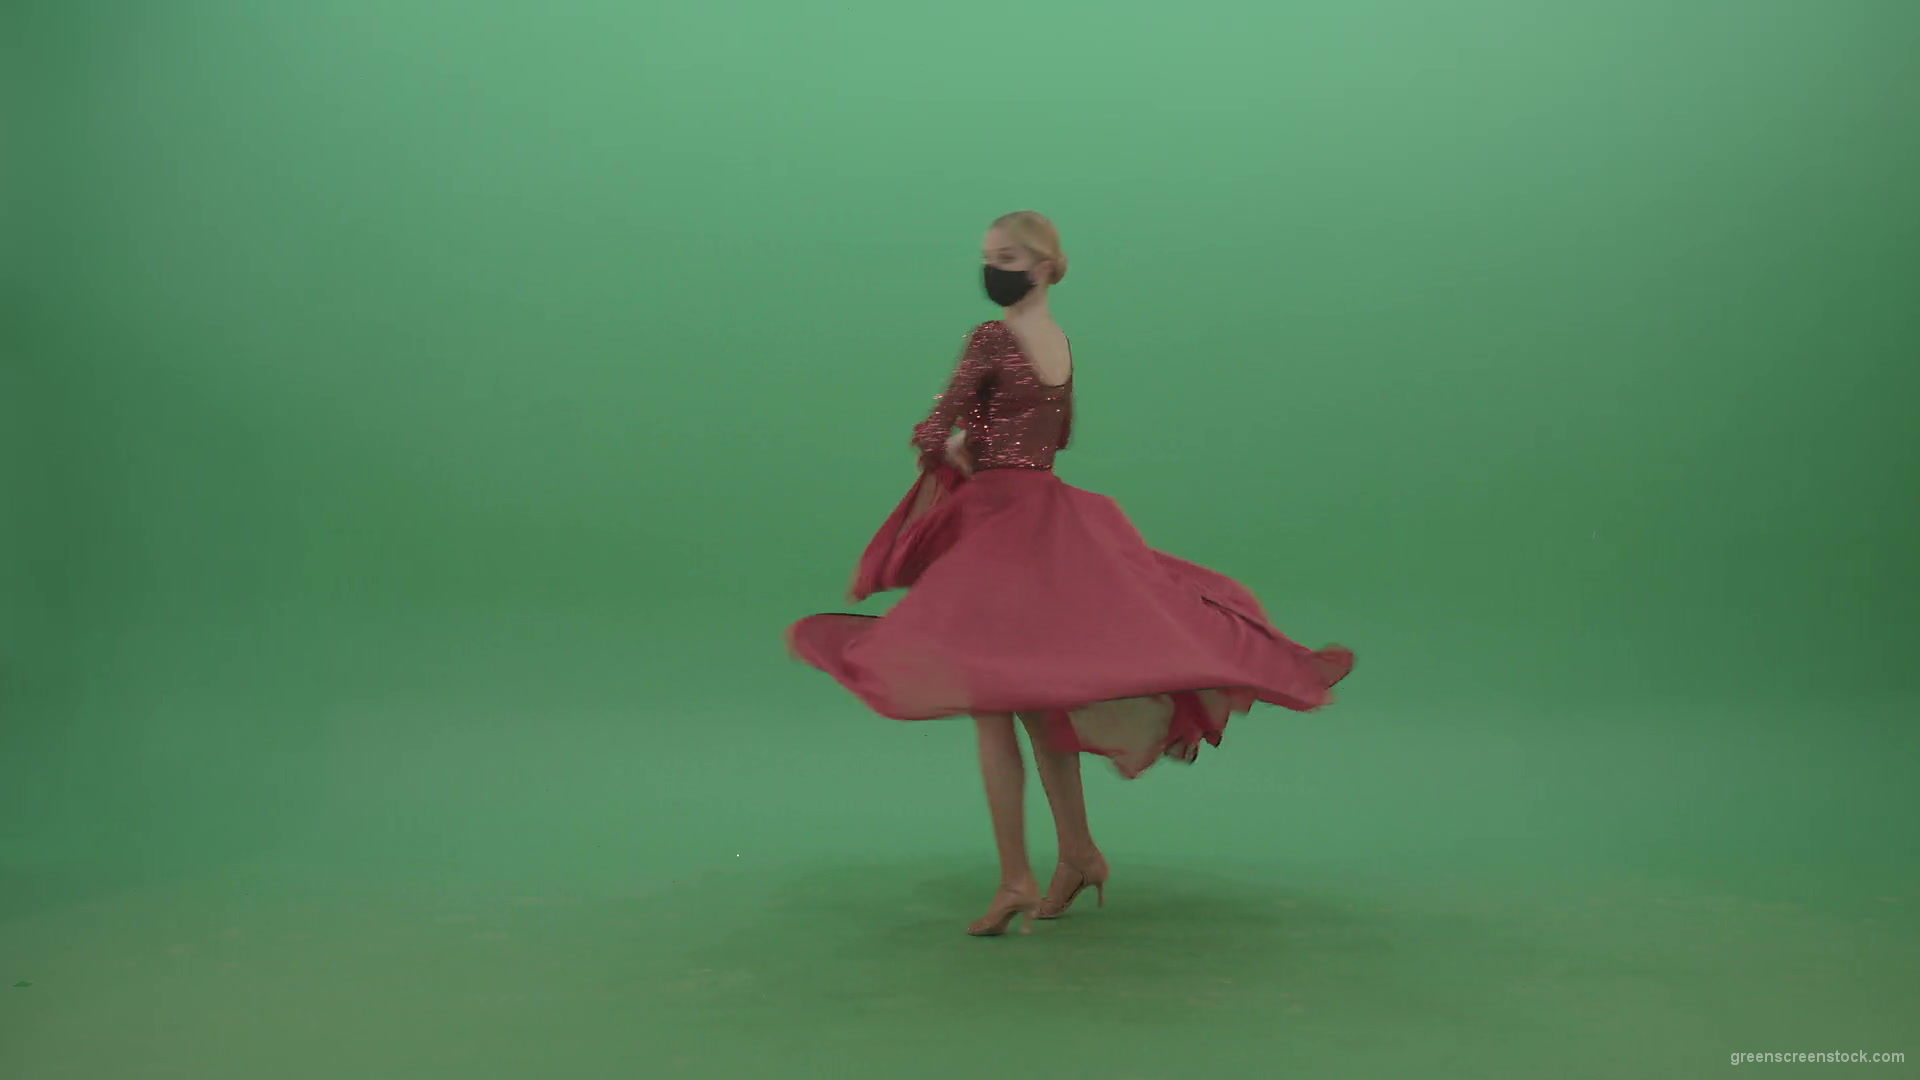 Blonde-Girl-in-red-Flamenco-Dress-makes-spinning-bowing-isolated-on-green-screen-4K-Video-Footage-1920_008 Green Screen Stock